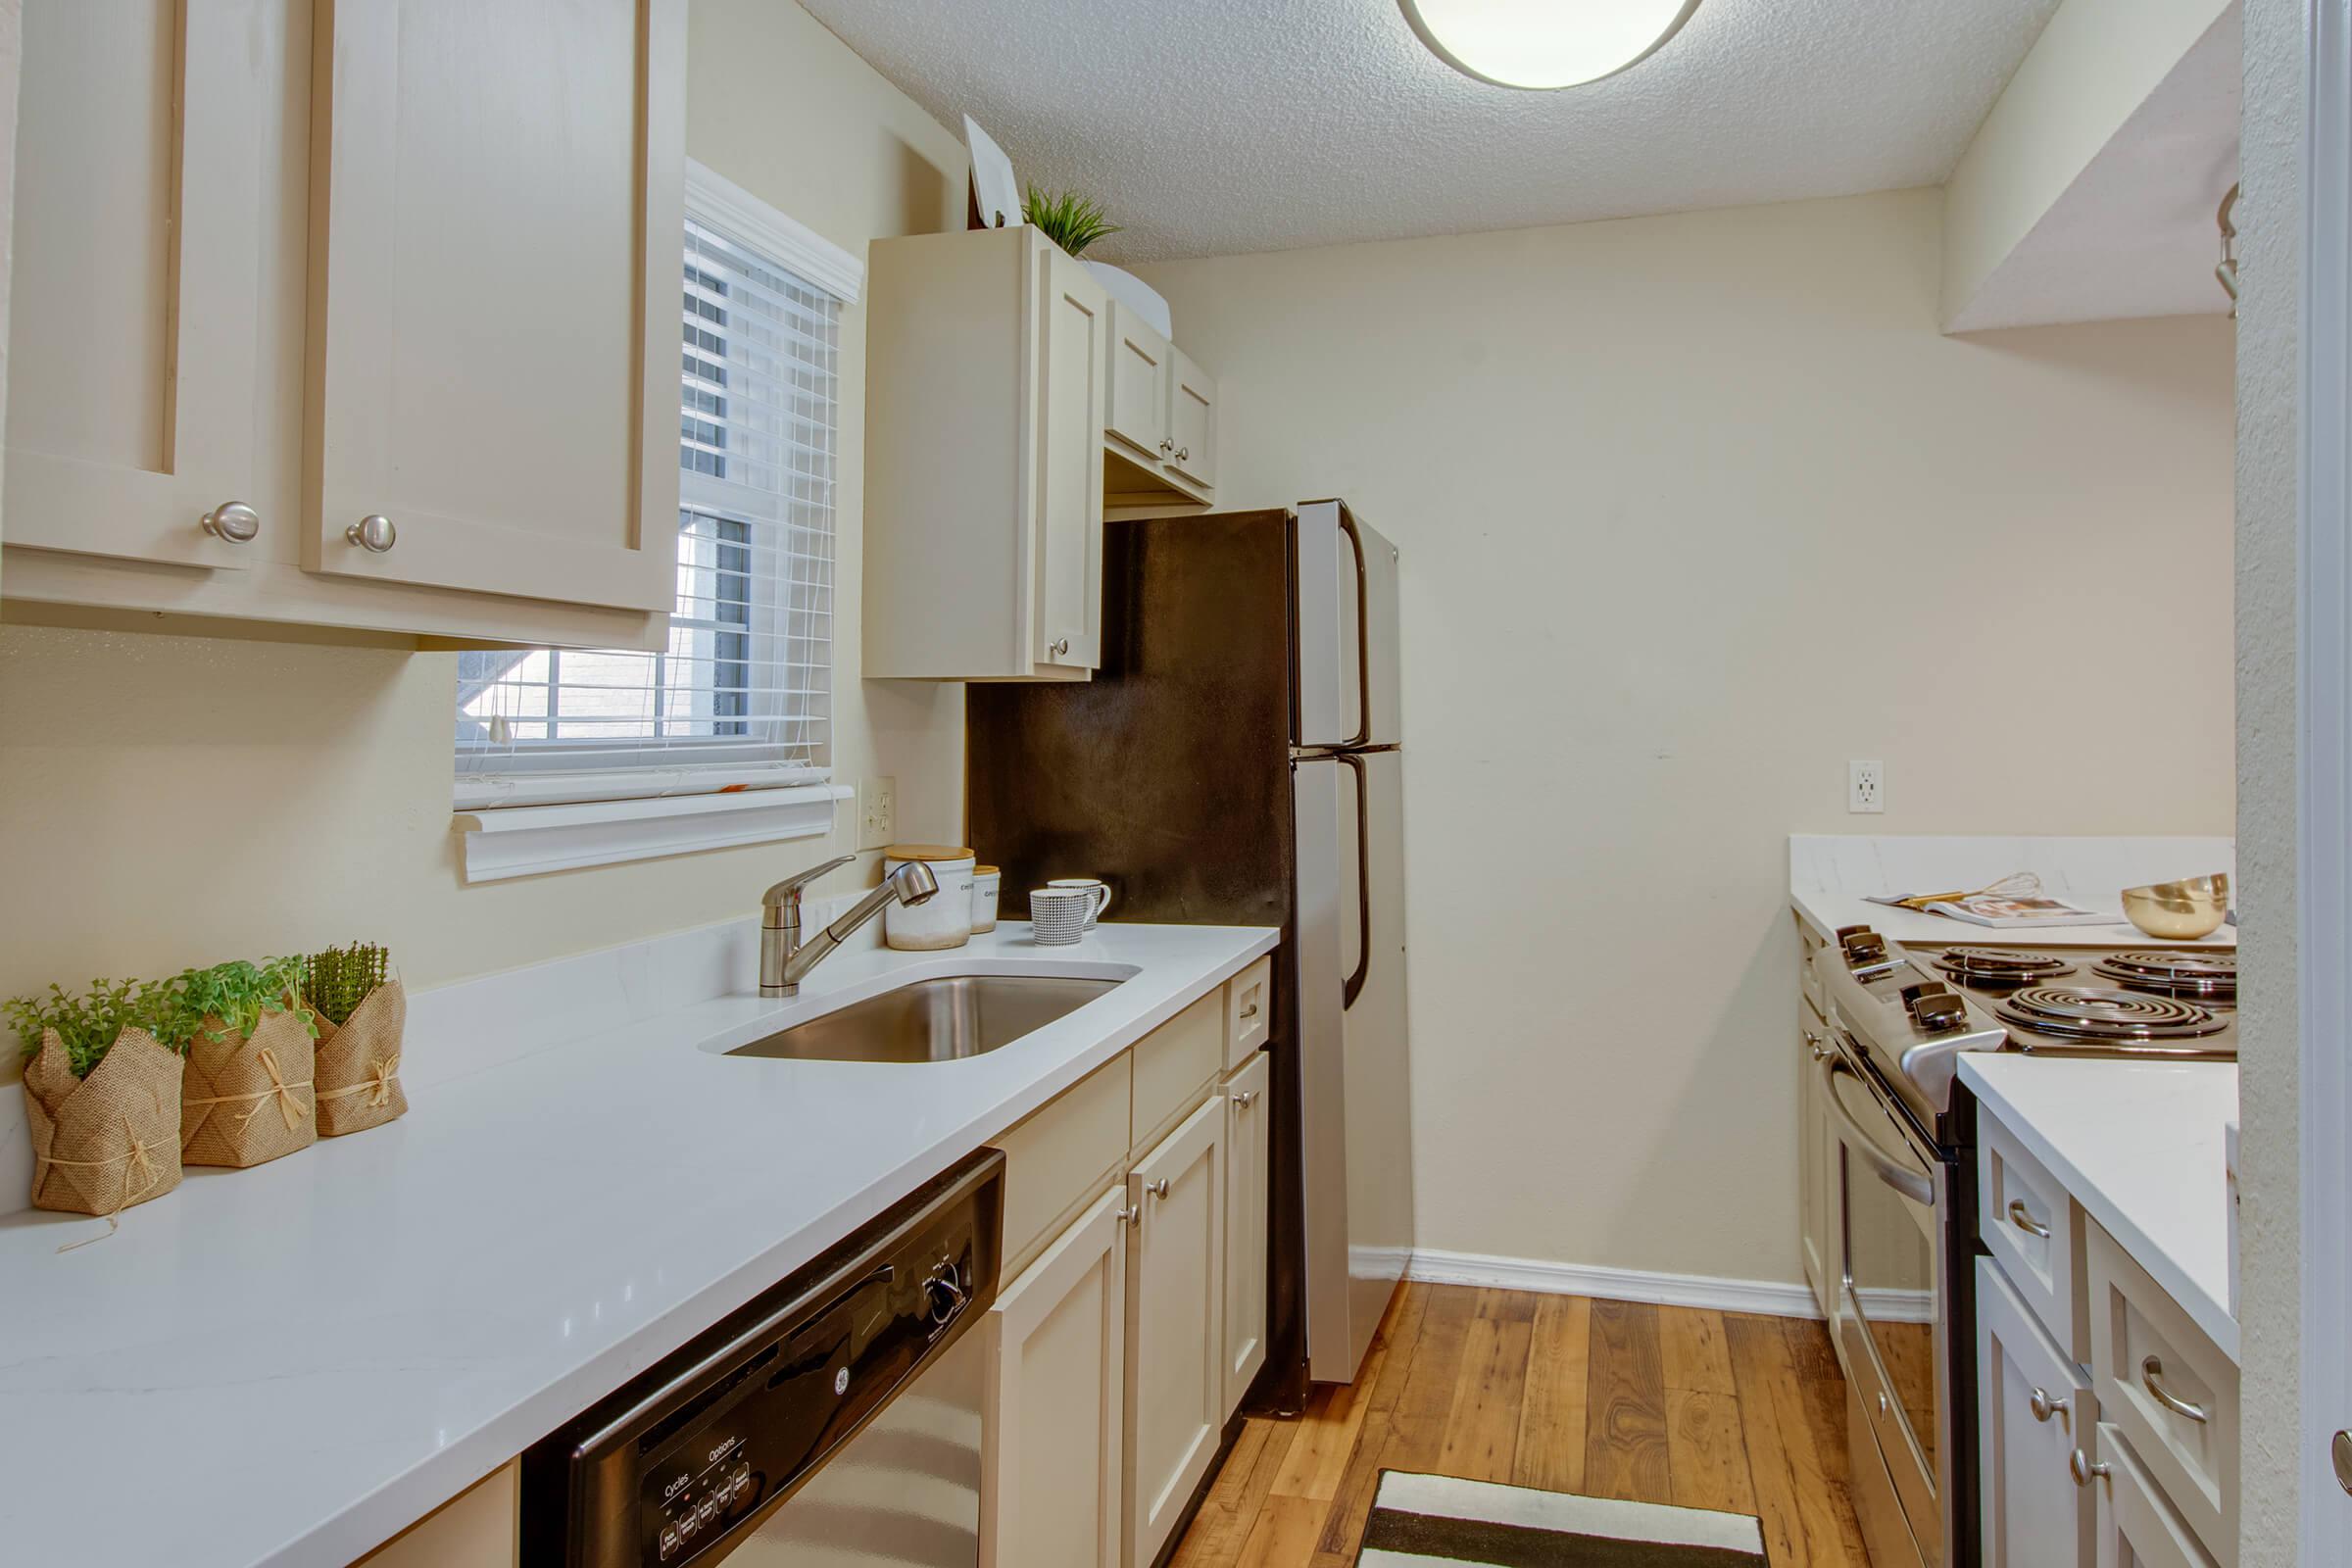 All-Electric Kitchen at South Wind Apartment Homes